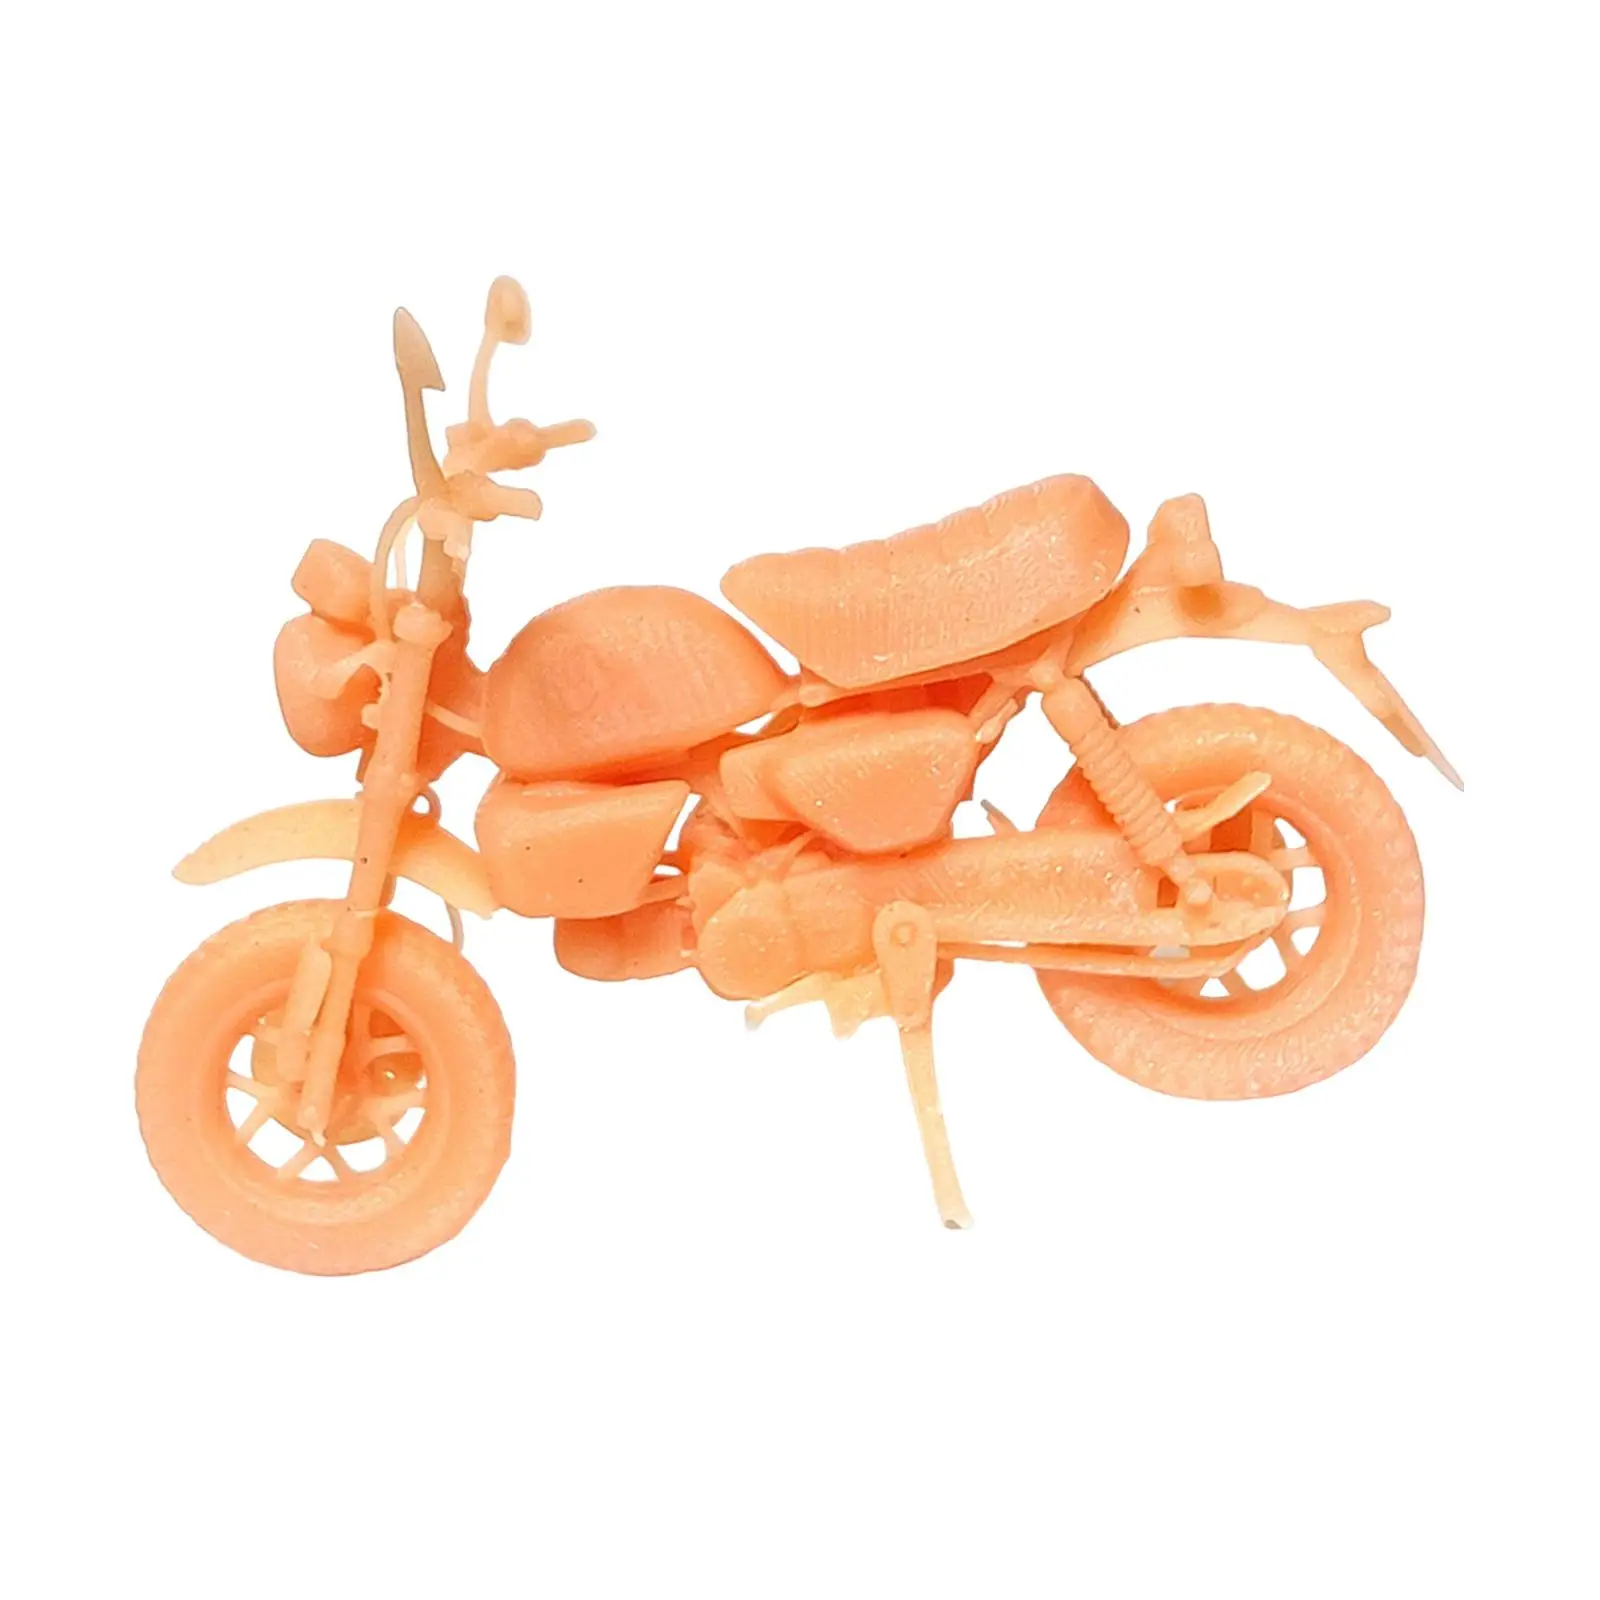 Resin 1:64 Motorcycle Model Mini Motorcycle Tiny Motorcycle for Miniature Scenes DIY Projects Layout Decoration Ornament